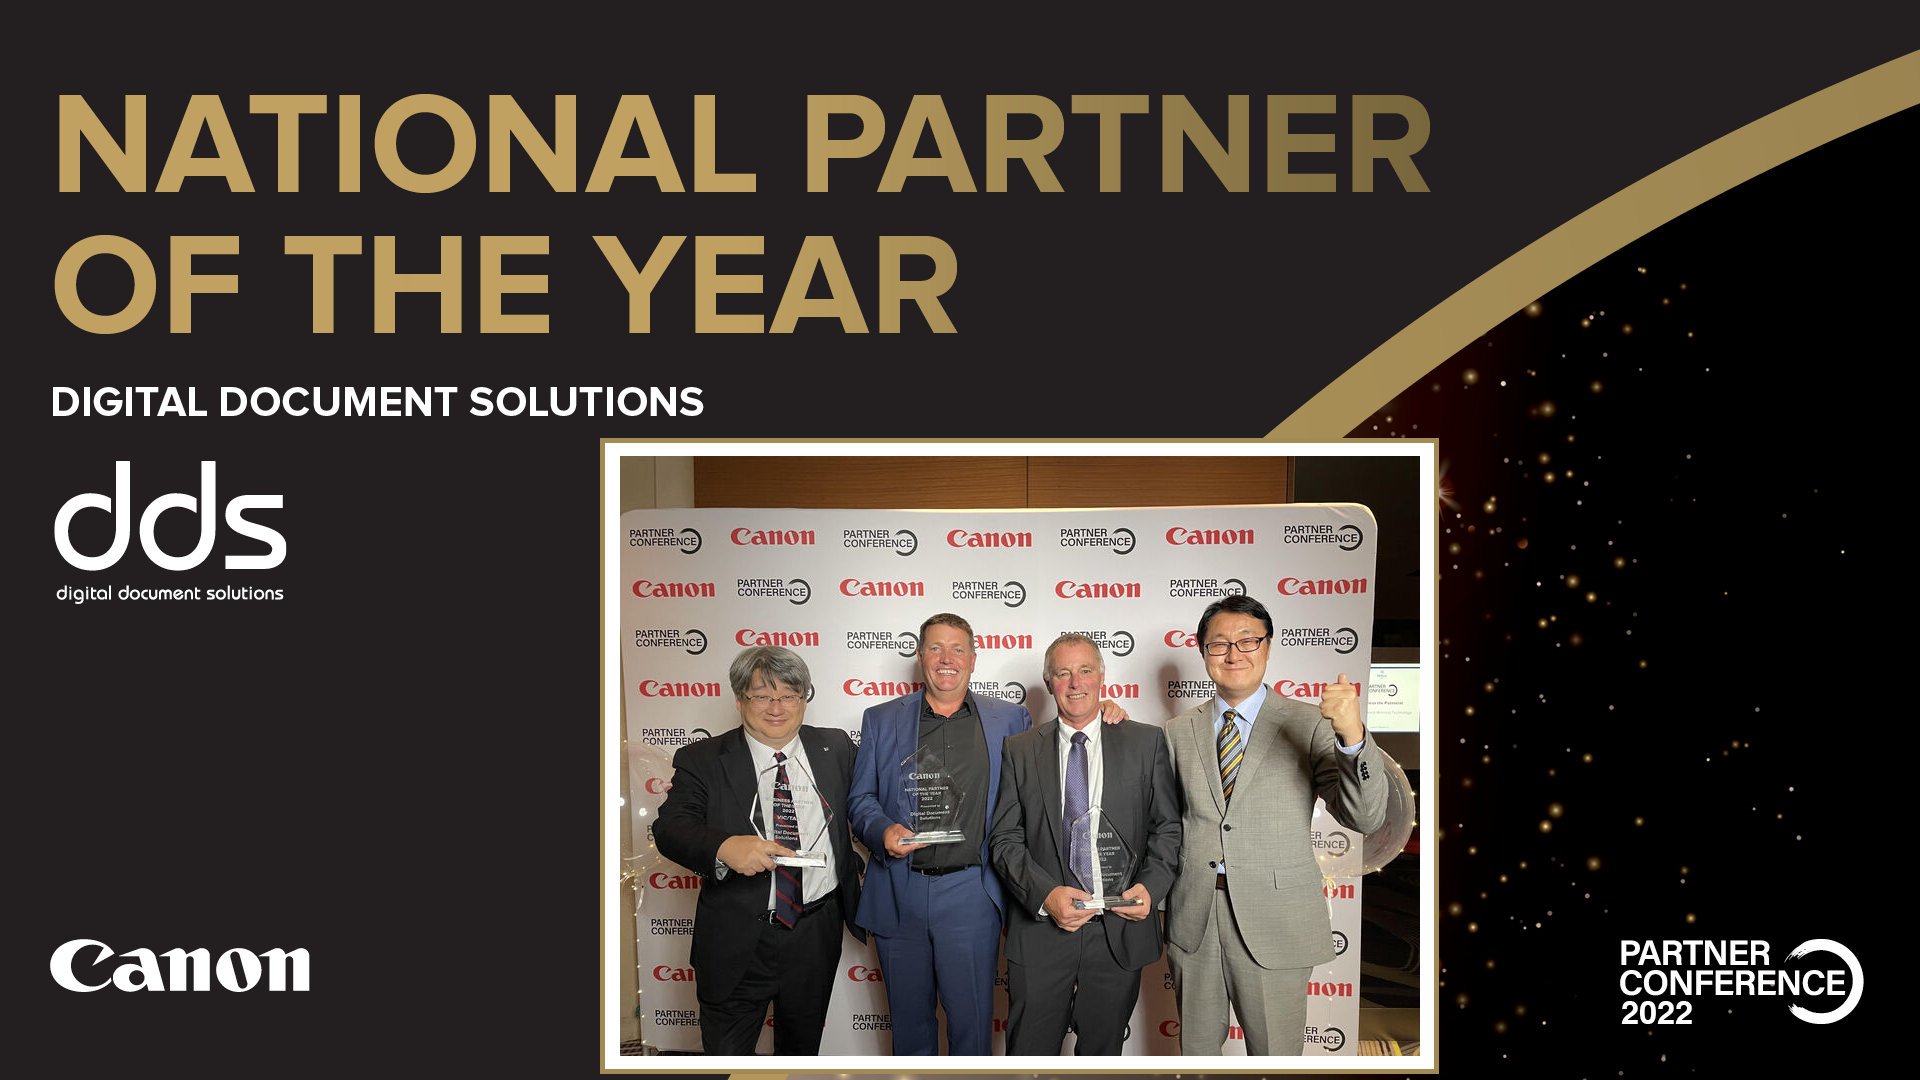 National Partner of the year